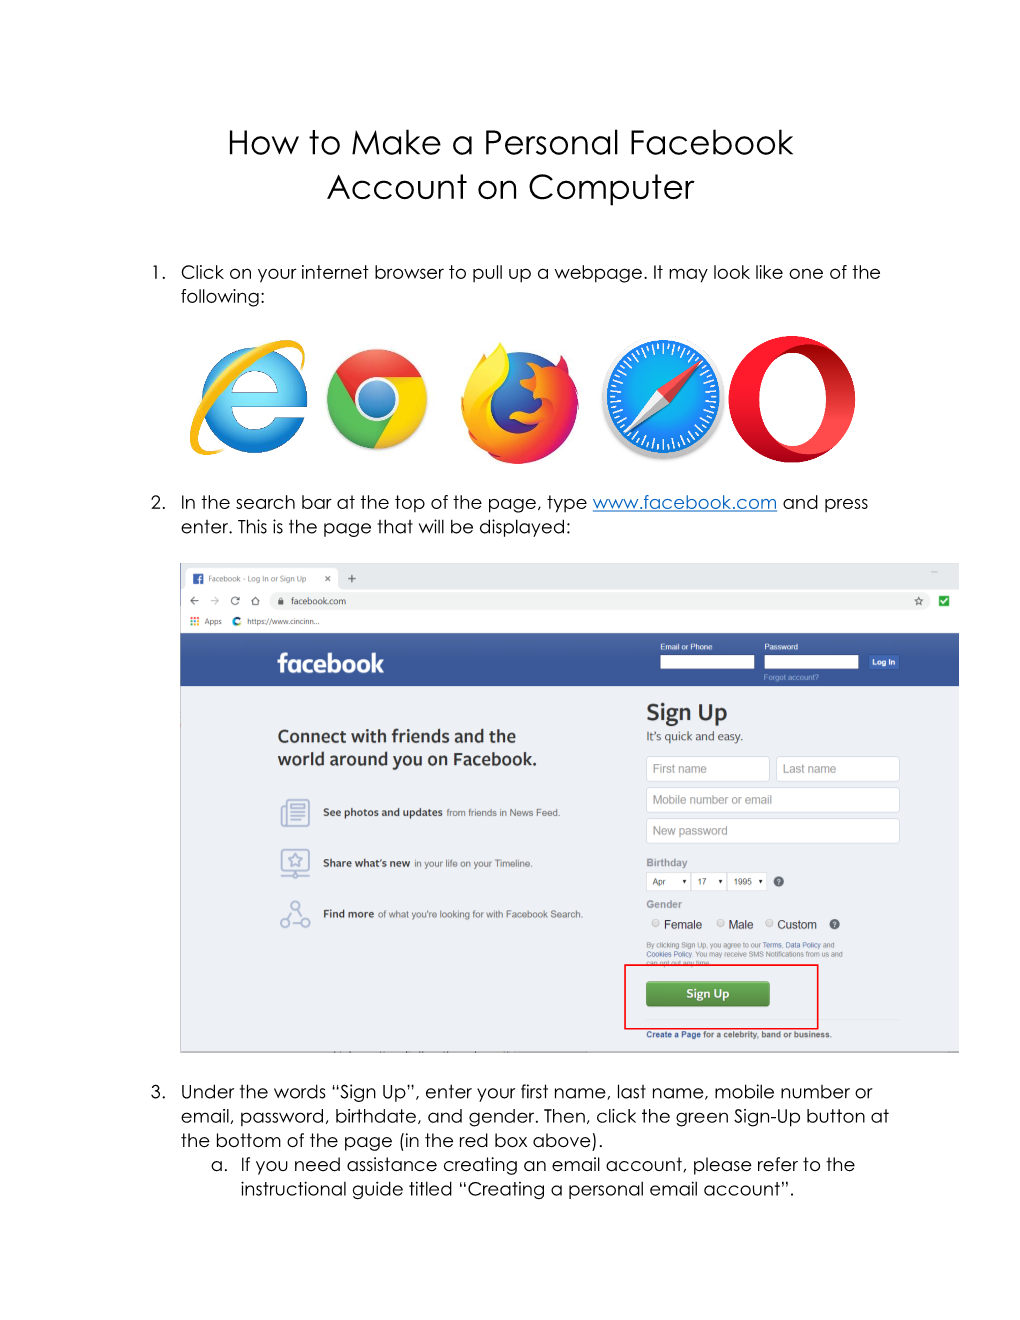 How to Make a Personal Facebook Account on Computer